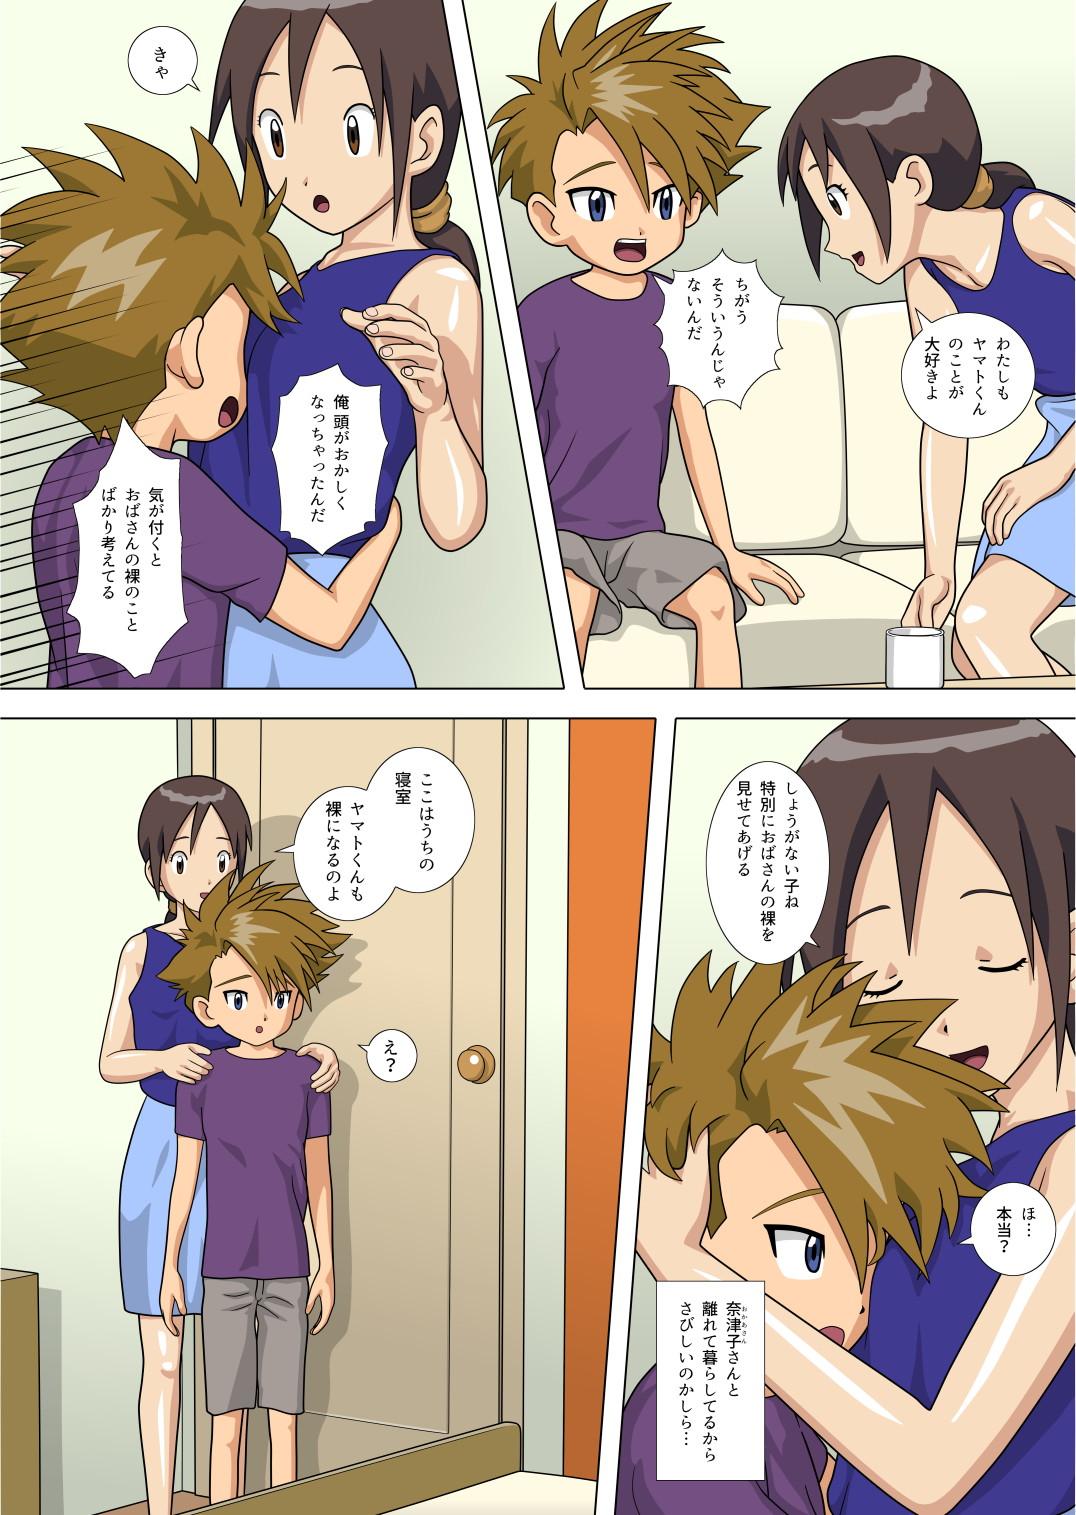 Real Amateur Friend's mother teaches me how to sex. - Digimon adventure Digimon Sharing - Page 3